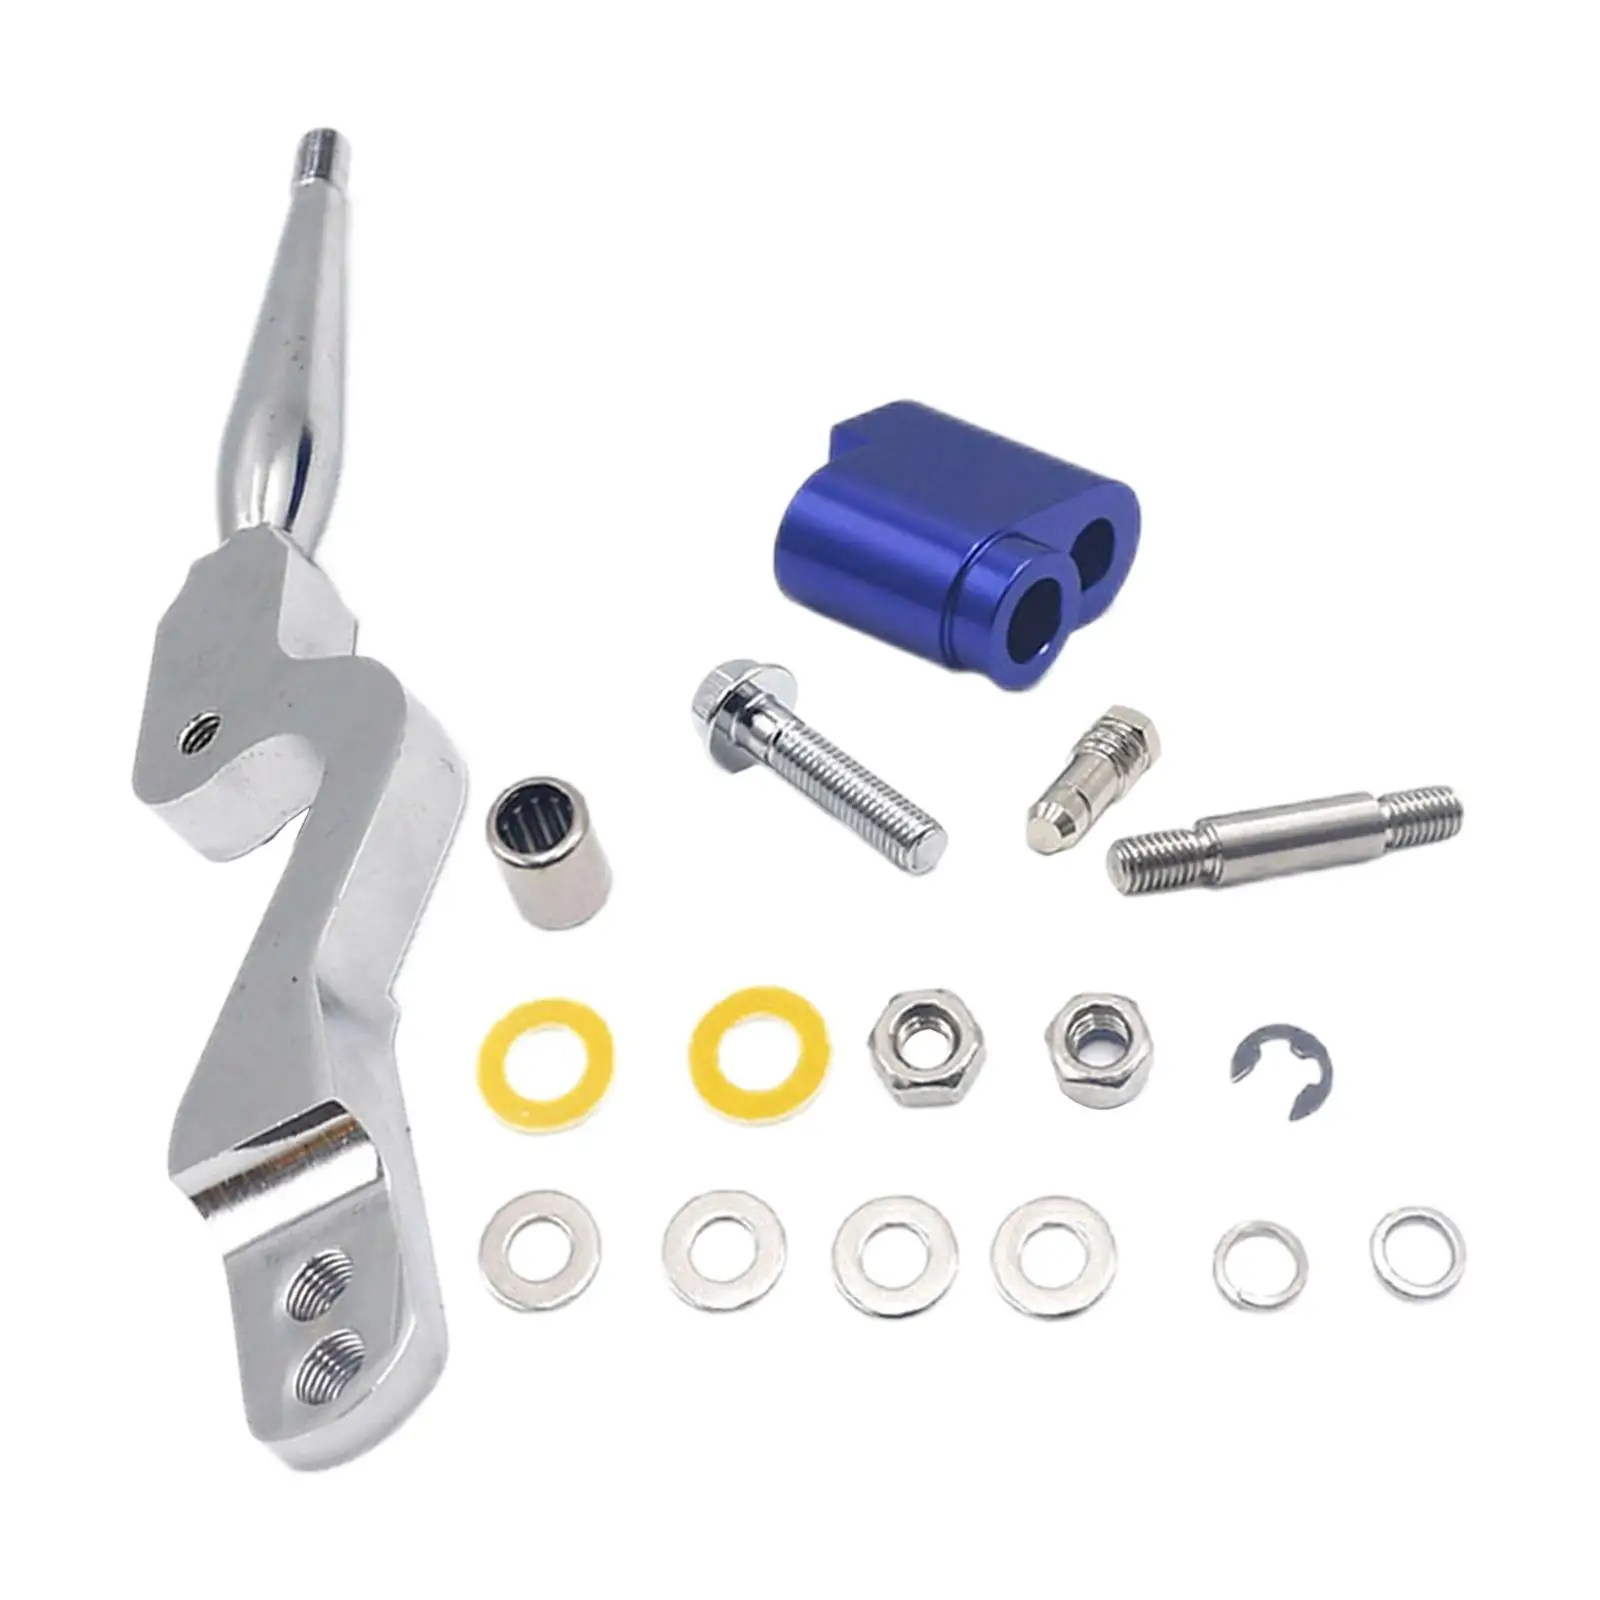 Quick Throw Short Shifter Car Parts Aluminum for Mitsubishi Eclipse 1995-1999 Gst GS DSM RS Manual Transmission